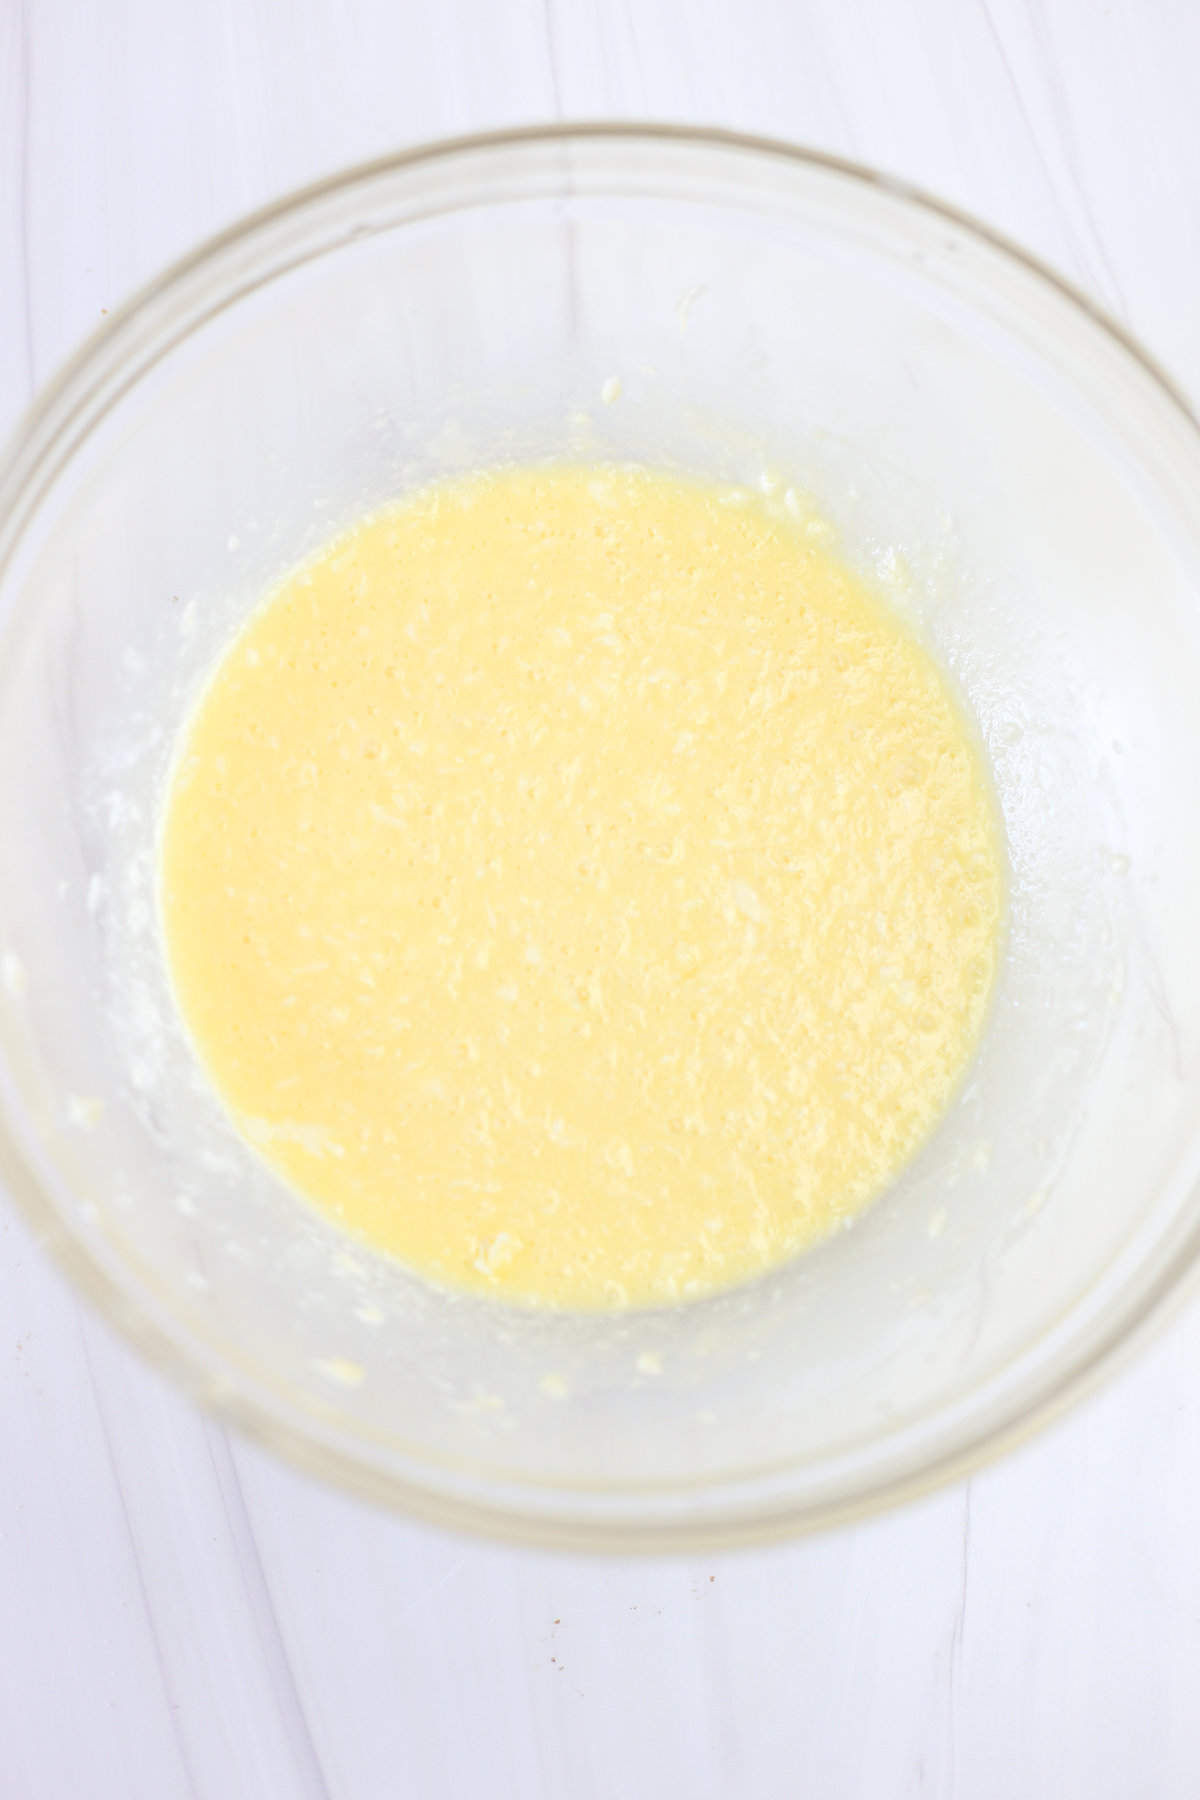 Melted butter, vanilla, water, and eggs mixed together in a glass mixing bowl.